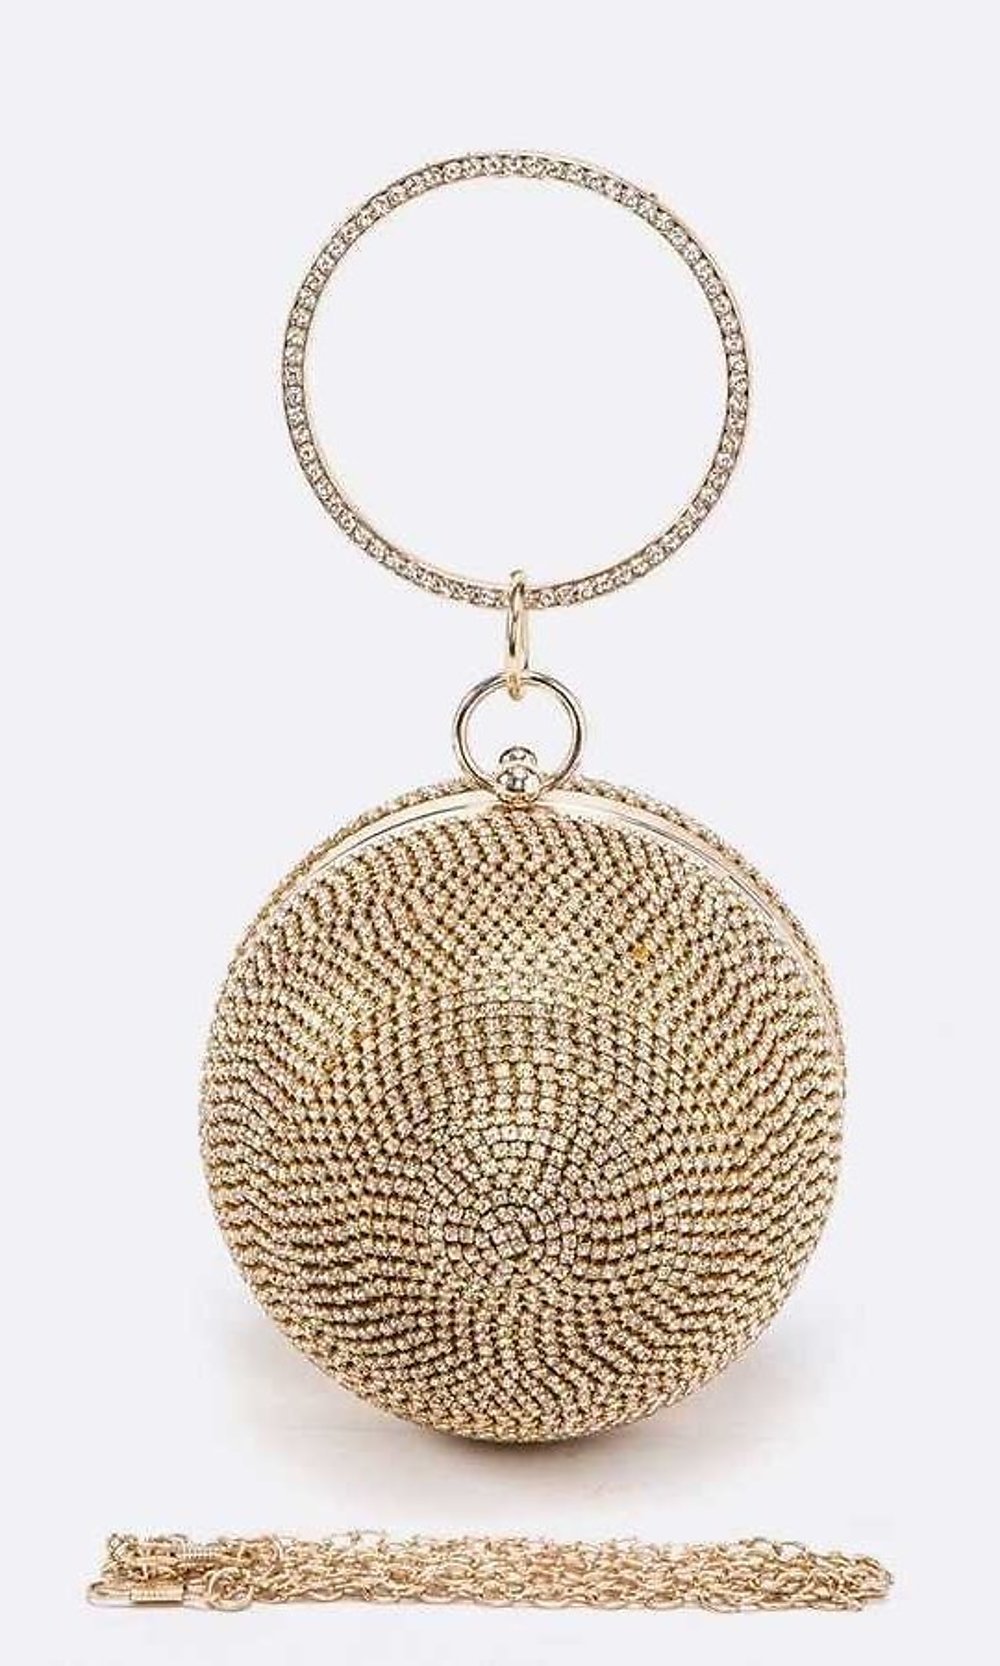 Shimmering Diamond Clutch Evening Bag For Women Perfect For Bridal And  Wedding Events Includes Round Ball Crystal And Tassel Purse Fashionable  Tote Nine West Handbags With Crossbody Strap From Weddings_mall, $29.16 |